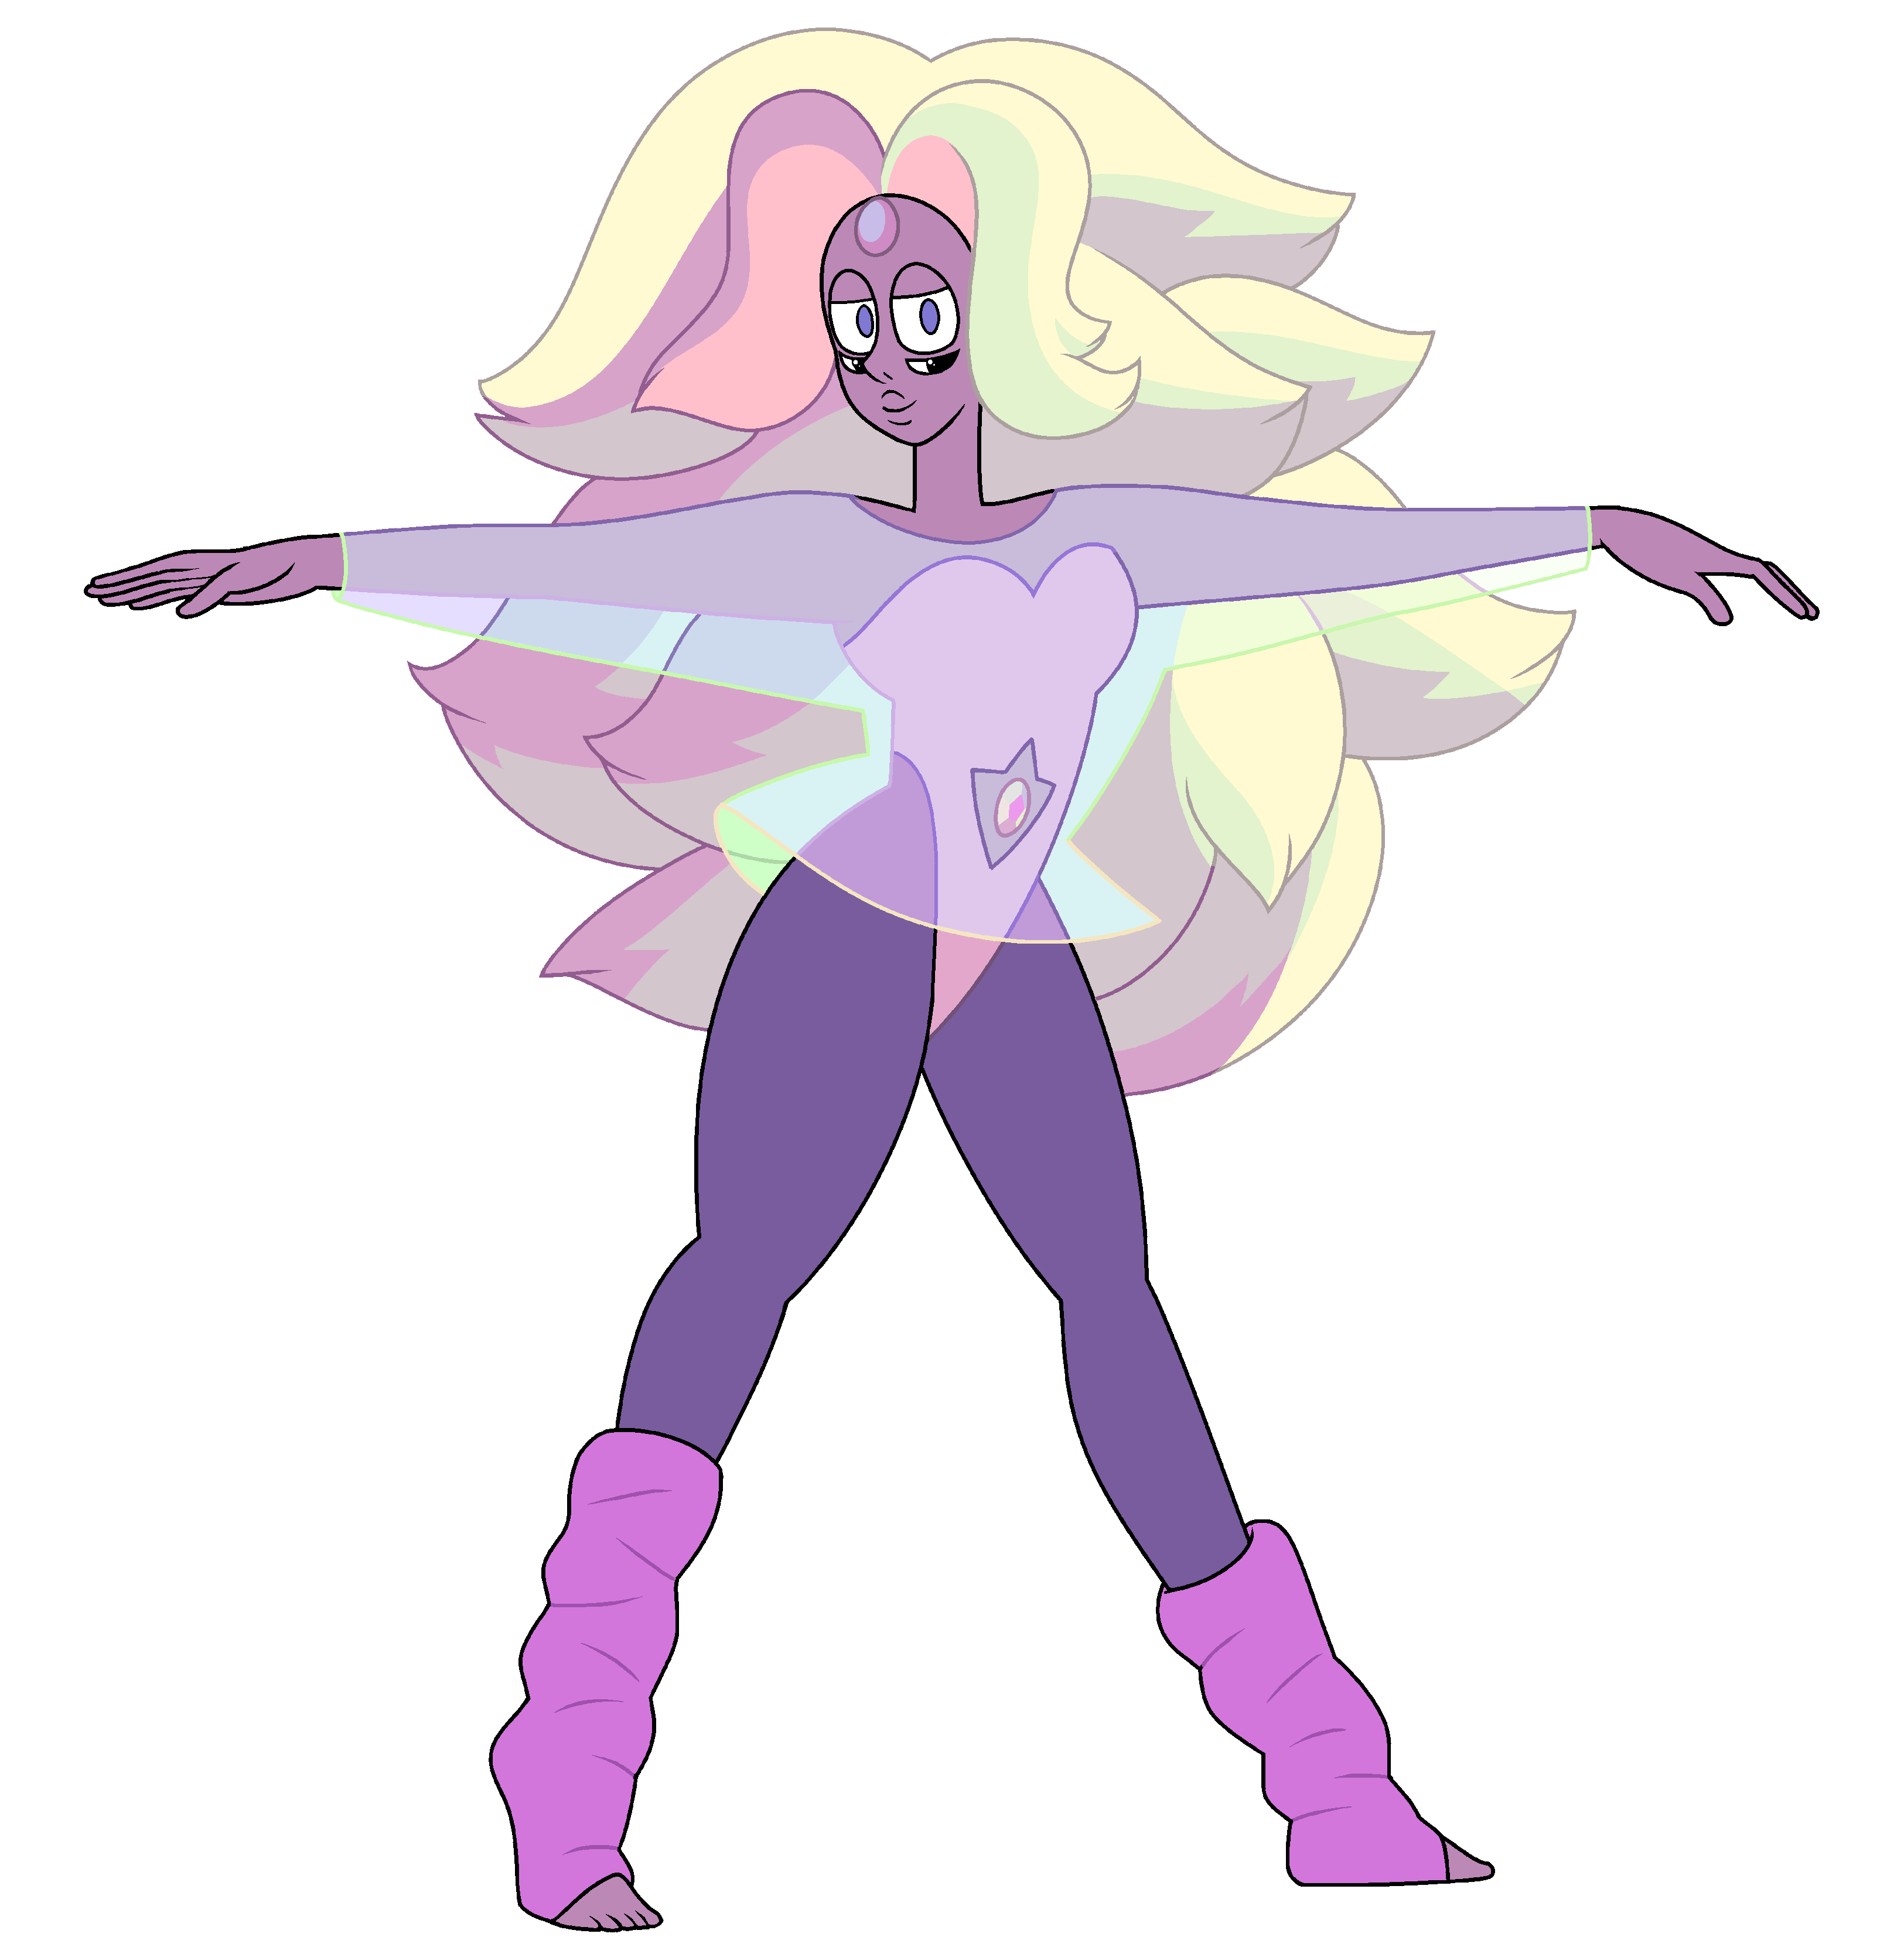 Name What Gems Make the Fusion by Picture Quiz - By Scribbleknots